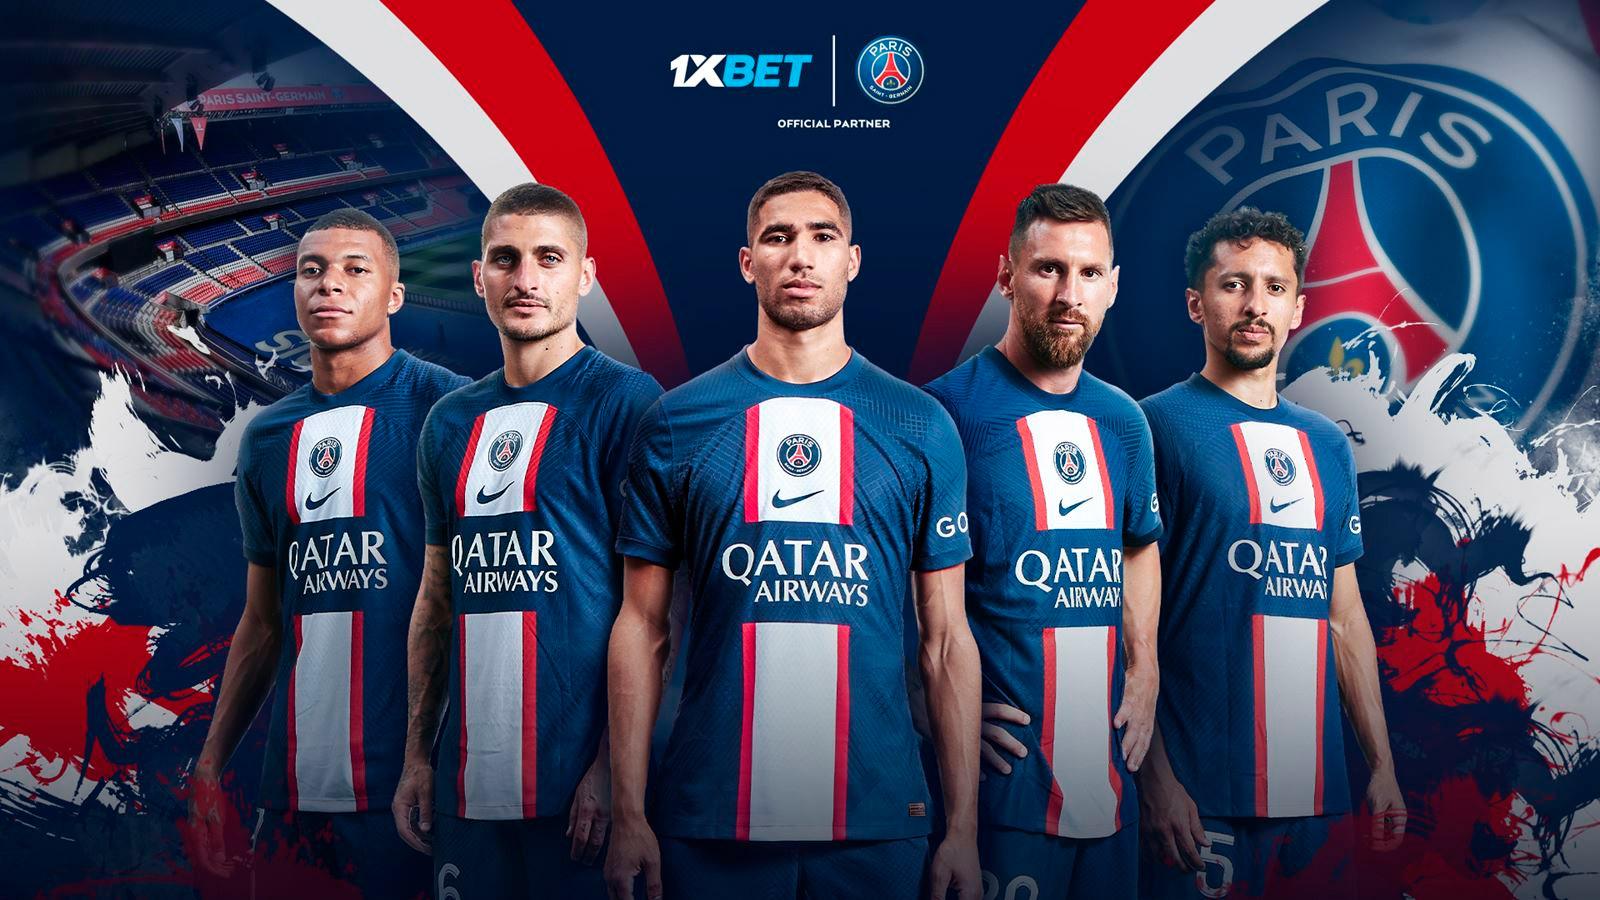 Sportsbook 1XBET becomes Paris Saint-Germain's new official regional partner in Africa and Asia